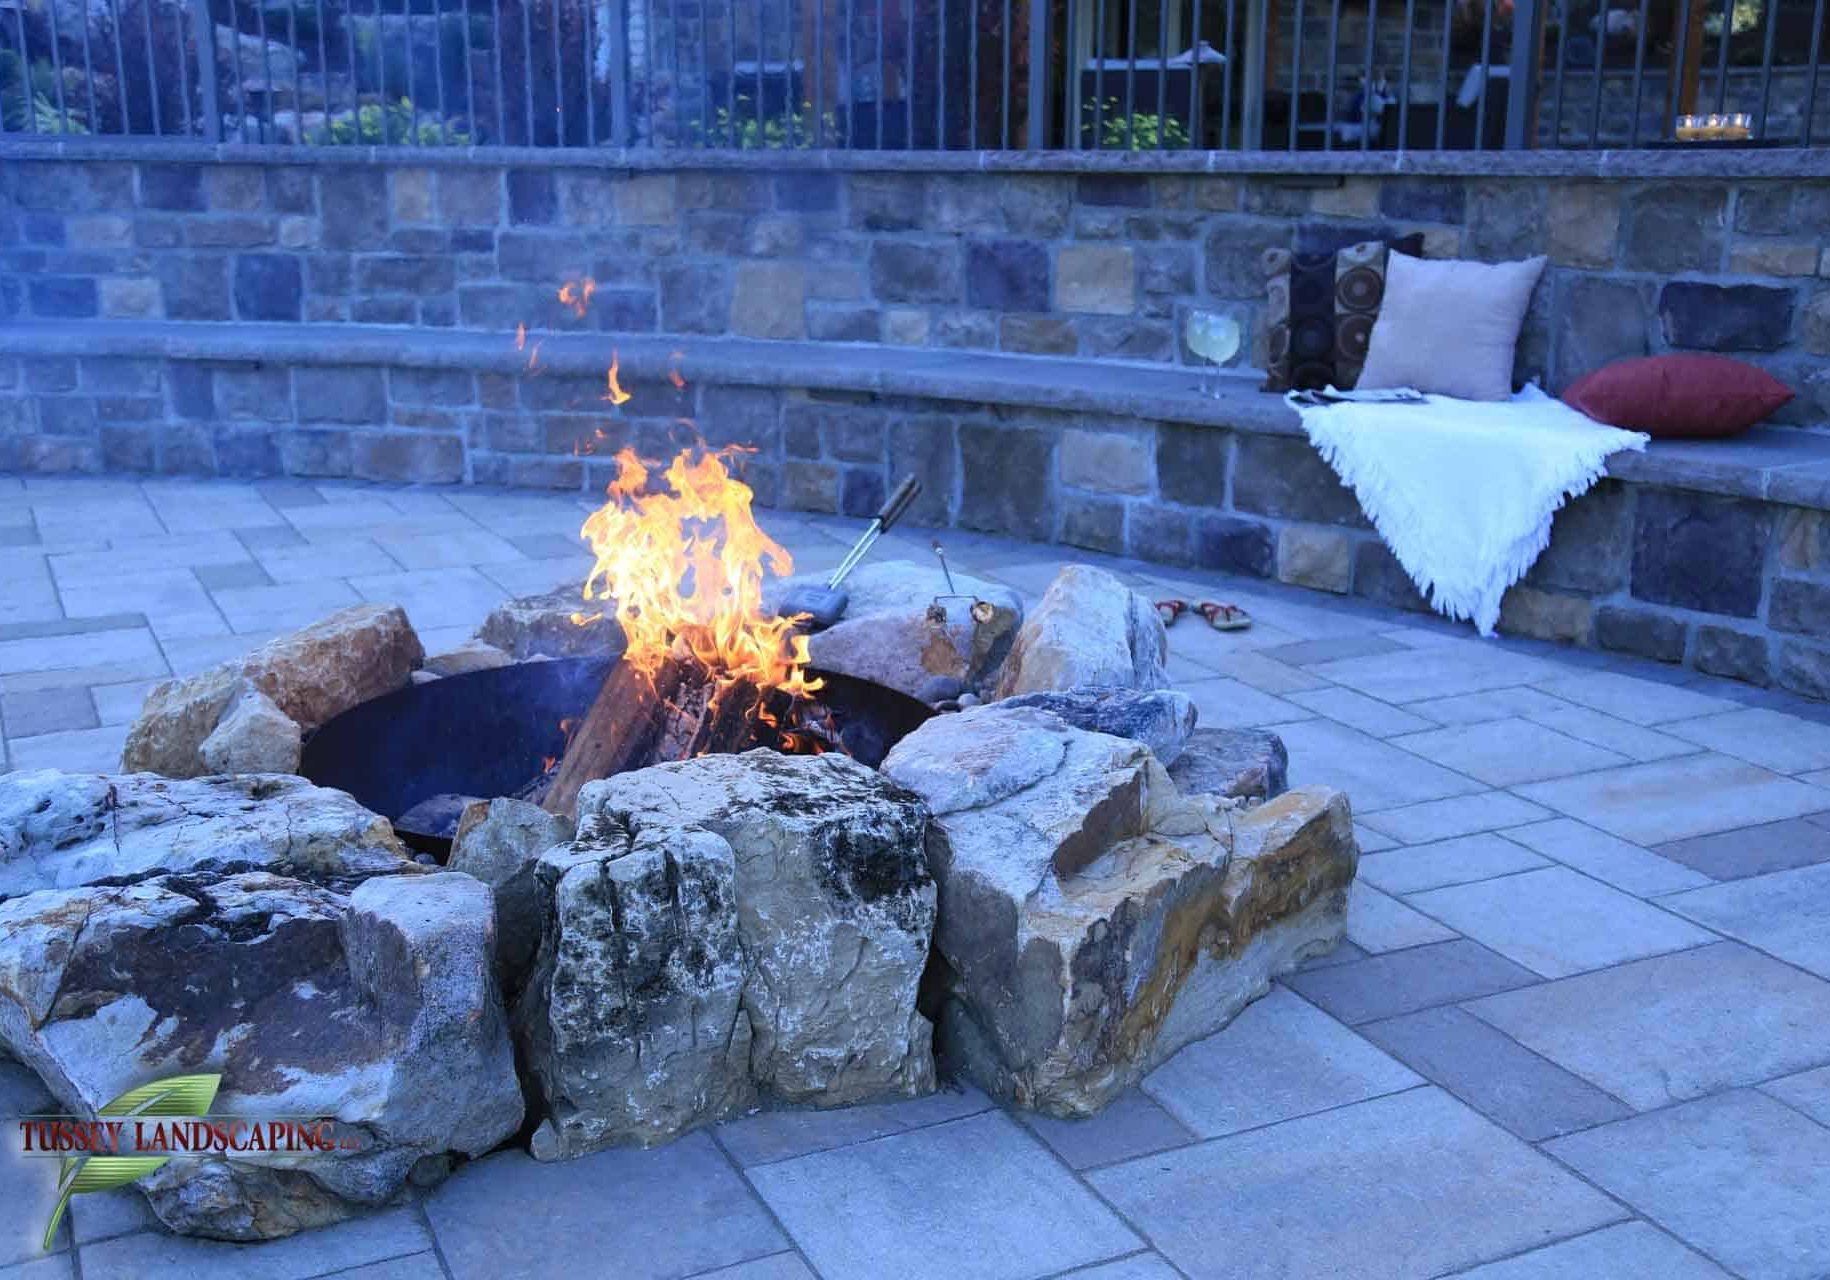 A fire pit is sitting on a stone patio.